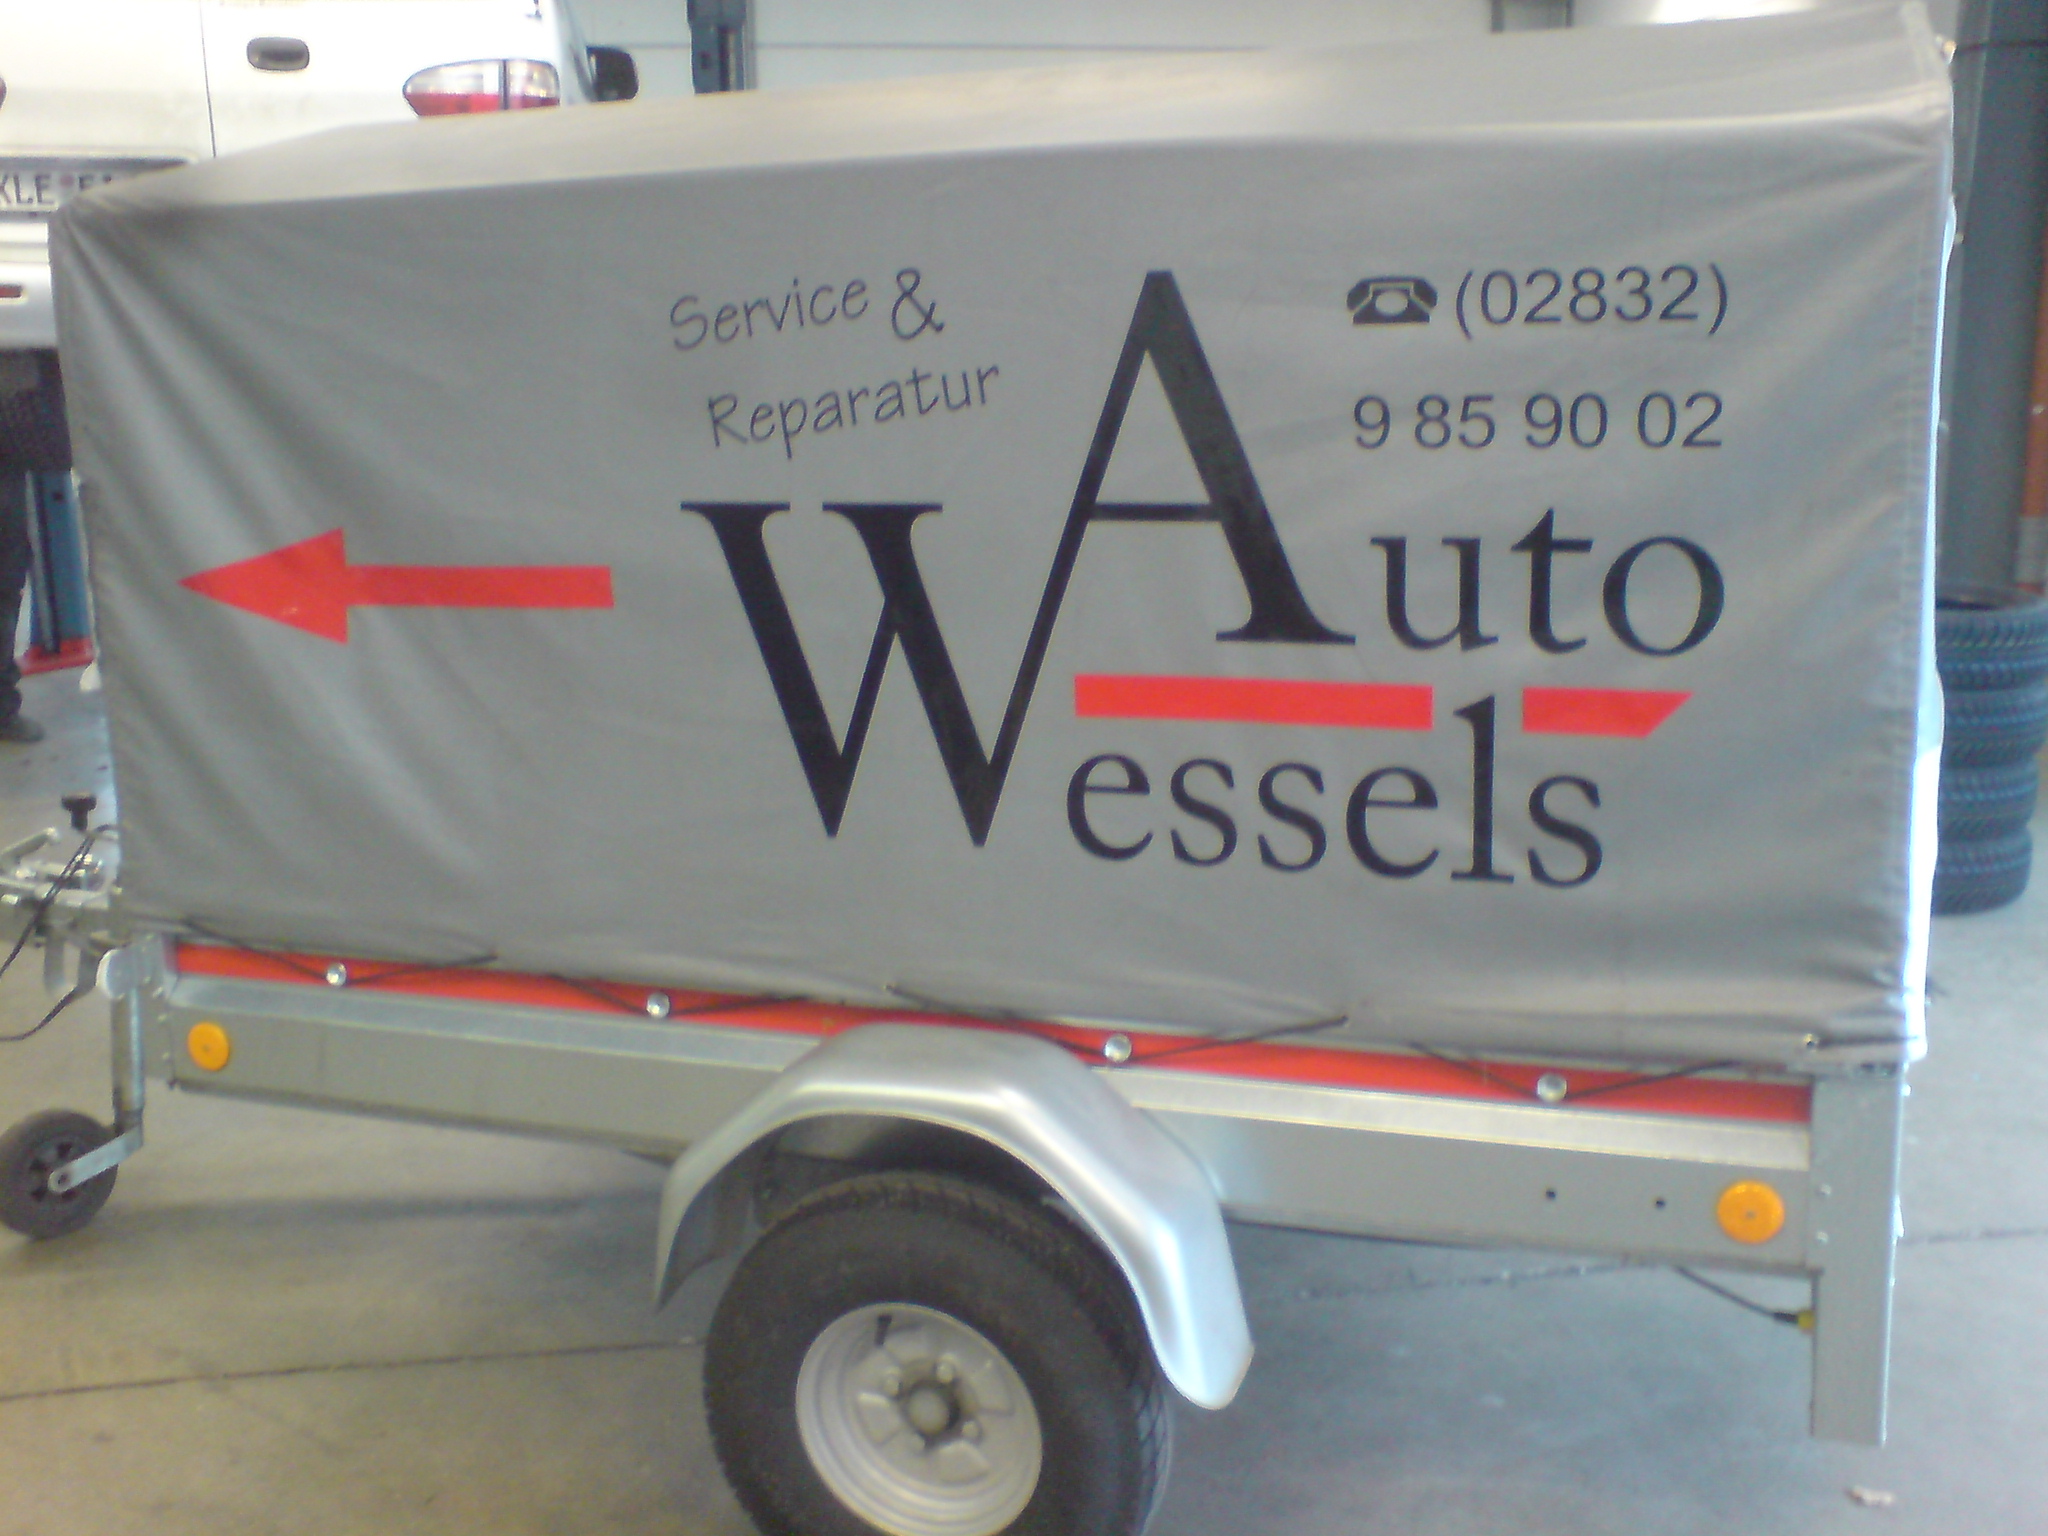 Auto-wessels